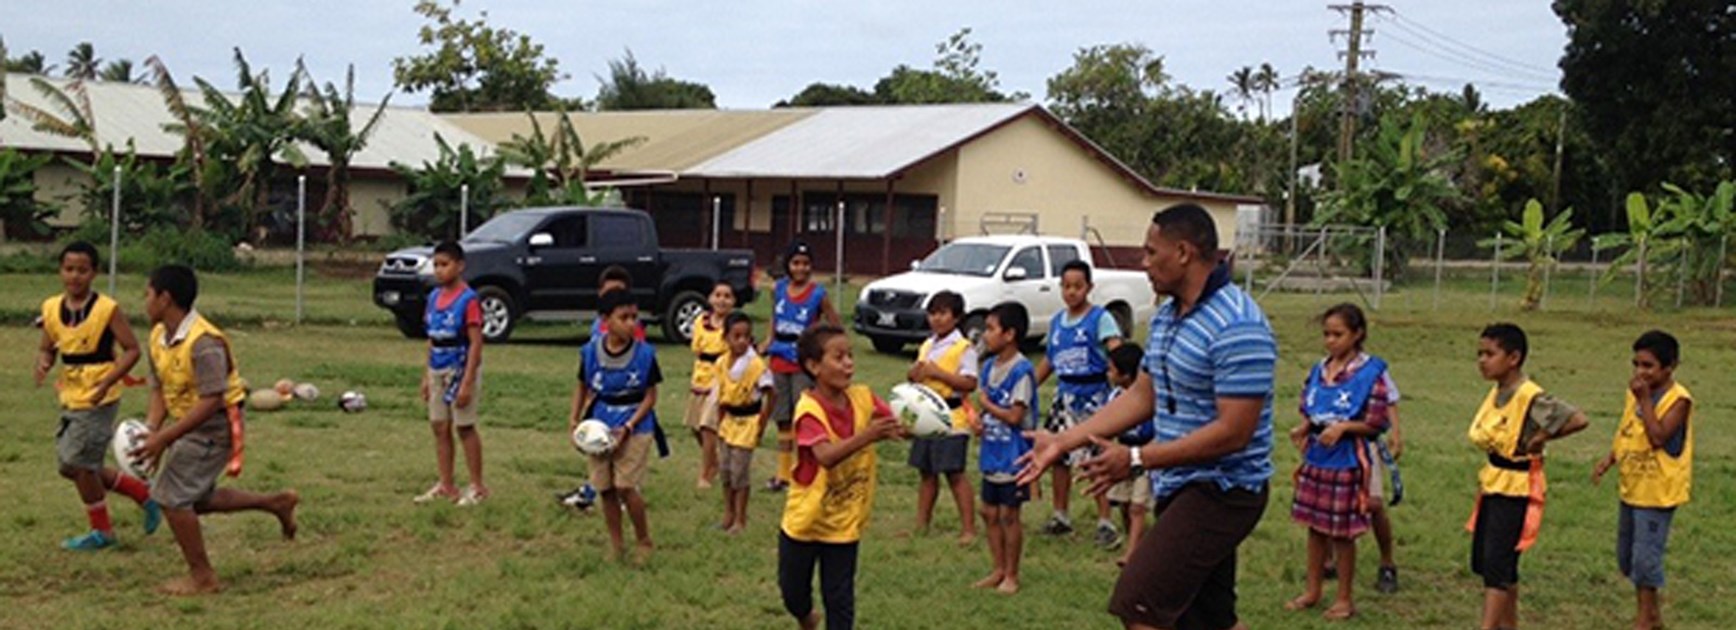 Ngeleia Primary School became the first school in Tonga to benefit from the League for Life Program.